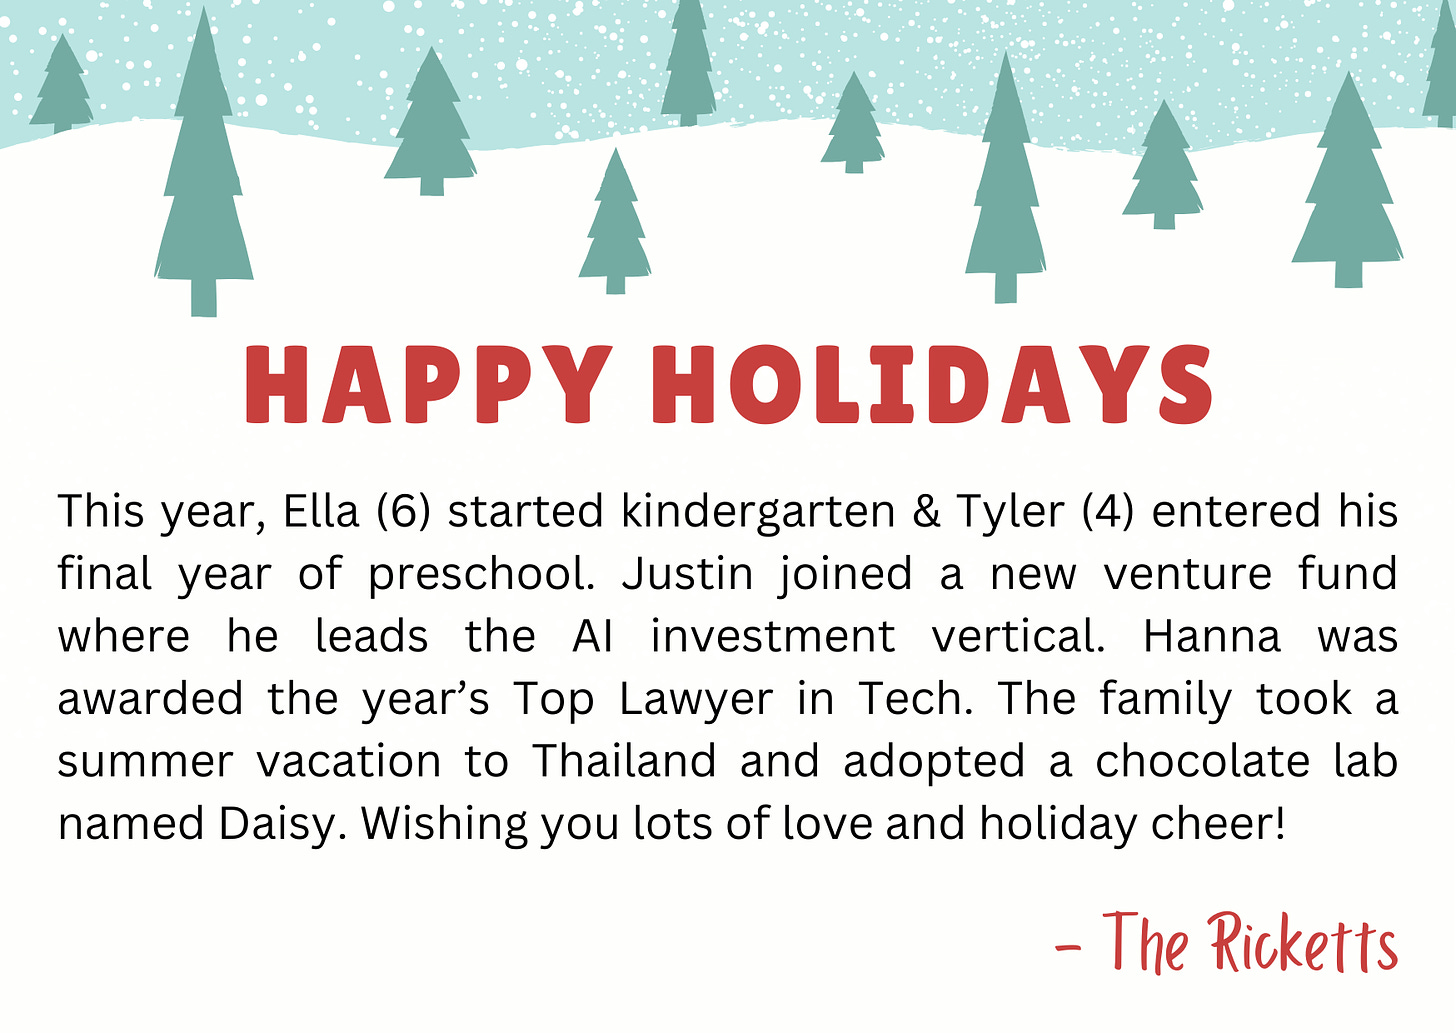 Card with Christmas trees with the following message: “This year, Ella (6) started kindergarten & Tyler (4) entered his final year of preschool. Justin joined a new venture fund where he leads the AI investment vertical. Hanna was awarded the year’s Top Lawyer in Tech. The family took a summer vacation to Thailand and adopted a chocolate lab named Daisy. Wishing you lots of love and holiday cheer! - The Ricketts”